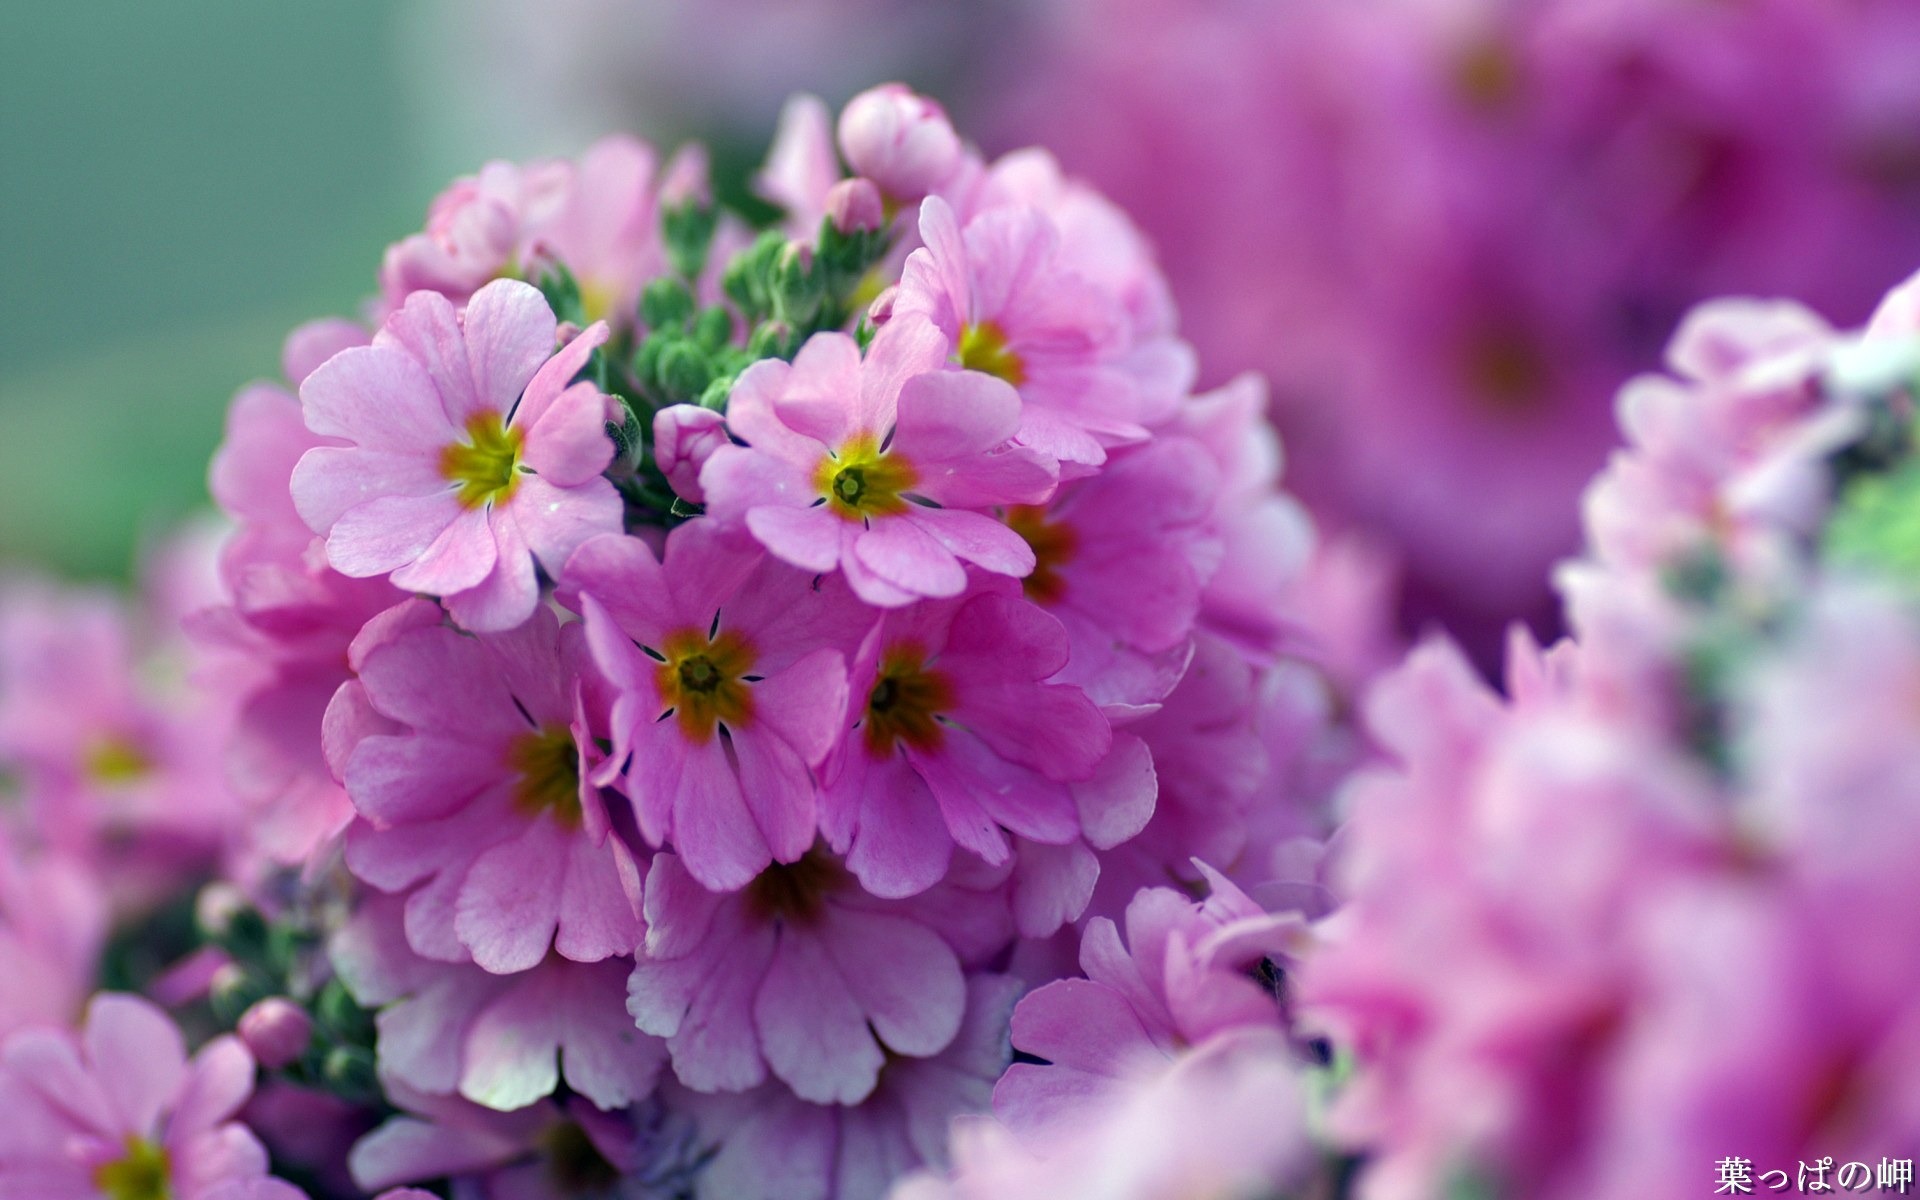 Personal Flowers HD Wallpapers #21 - 1920x1200